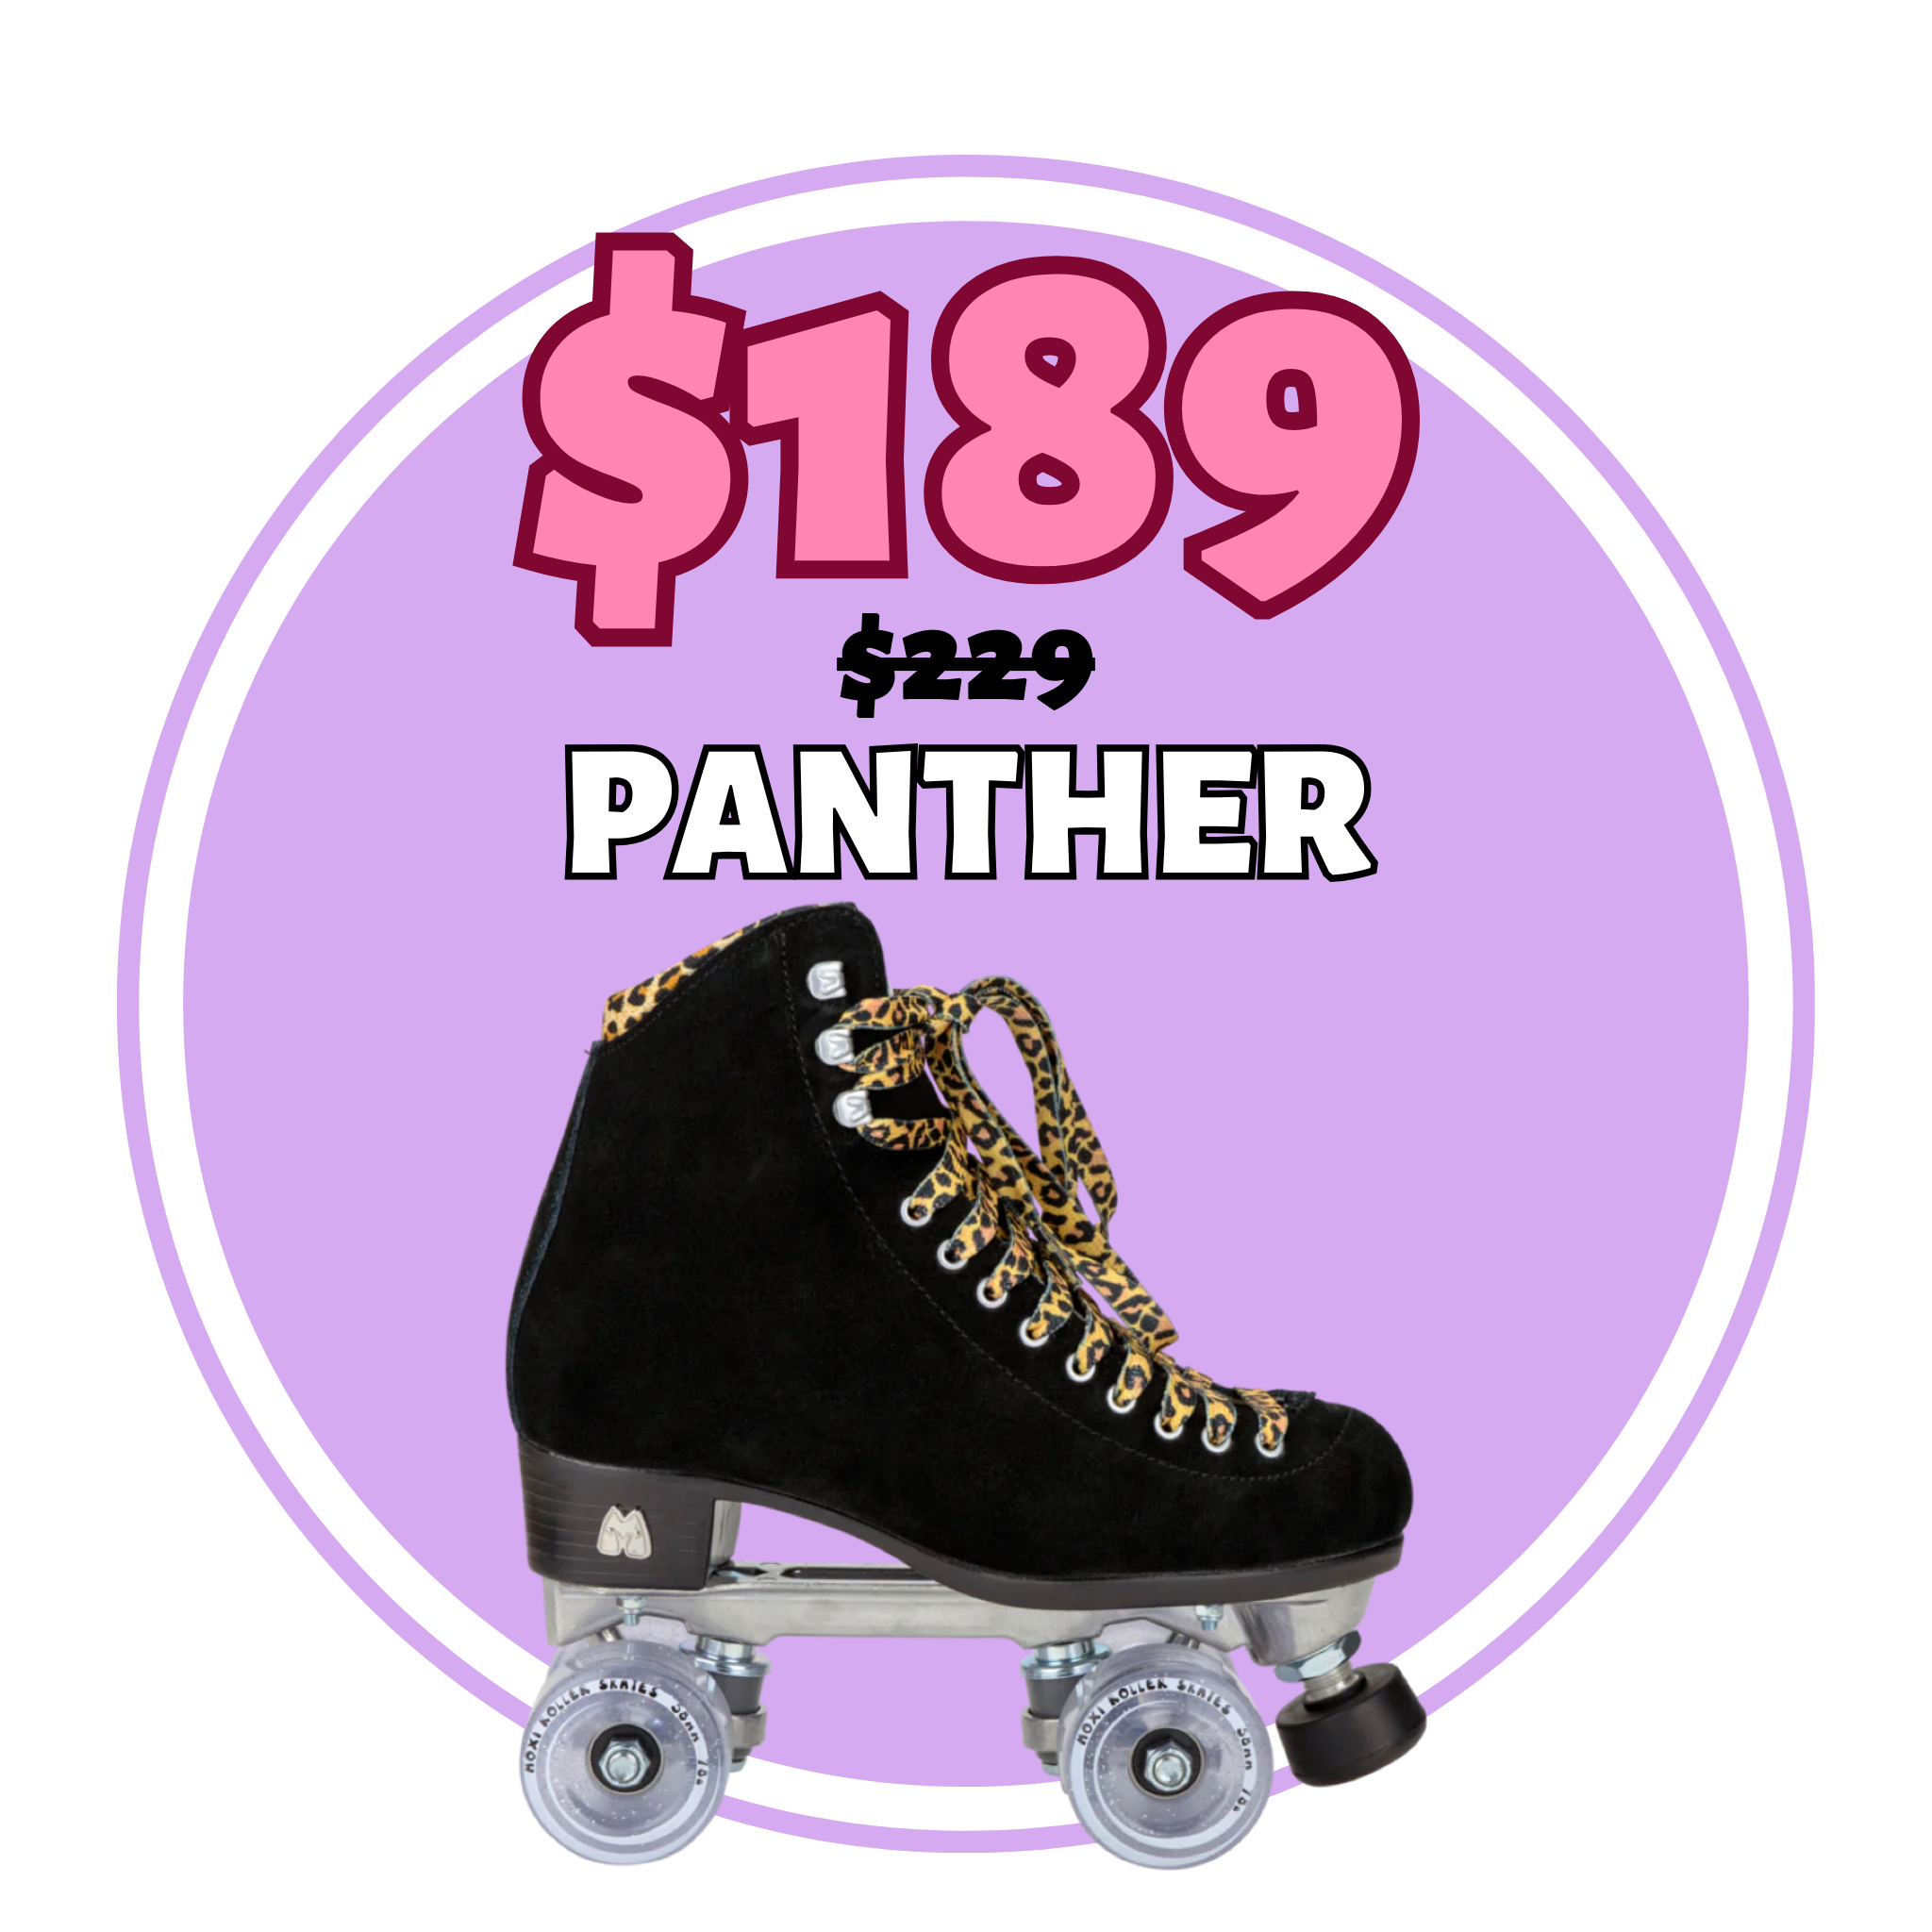 Panther. Regularly $229, on sale for $189